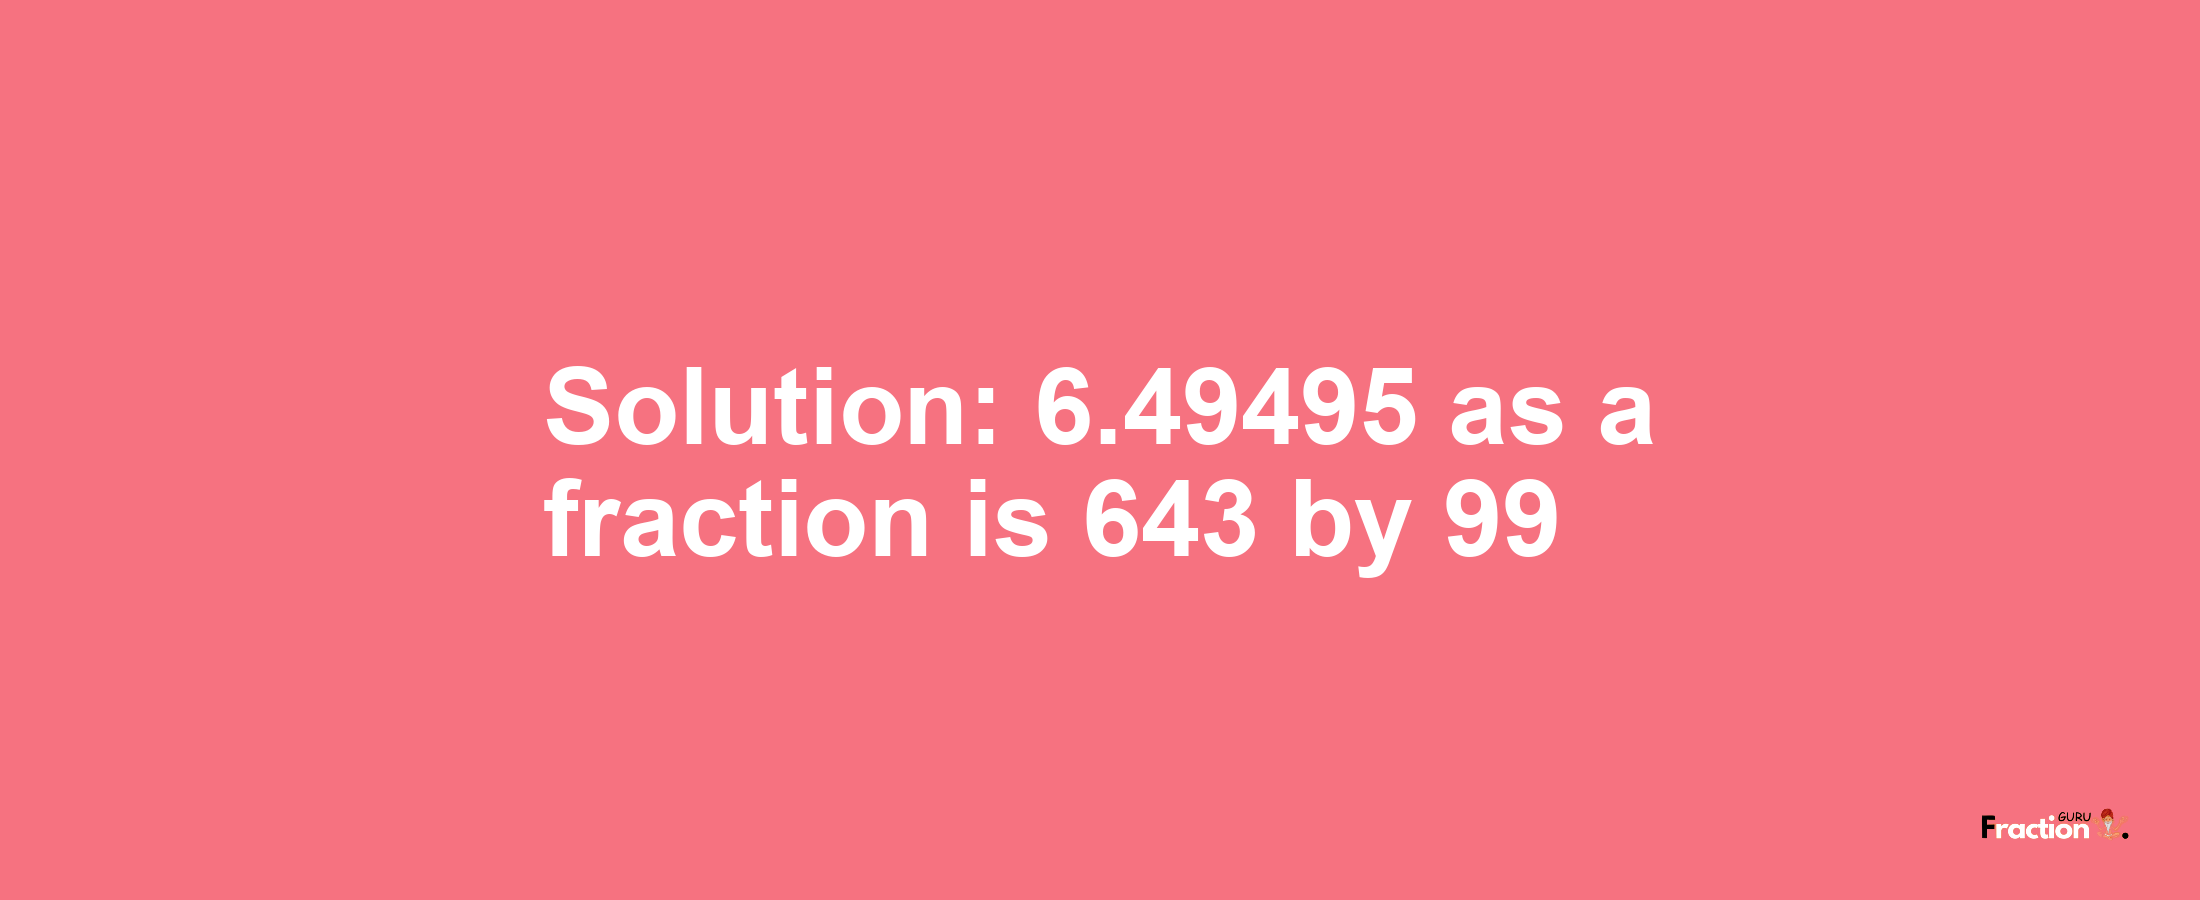 Solution:6.49495 as a fraction is 643/99